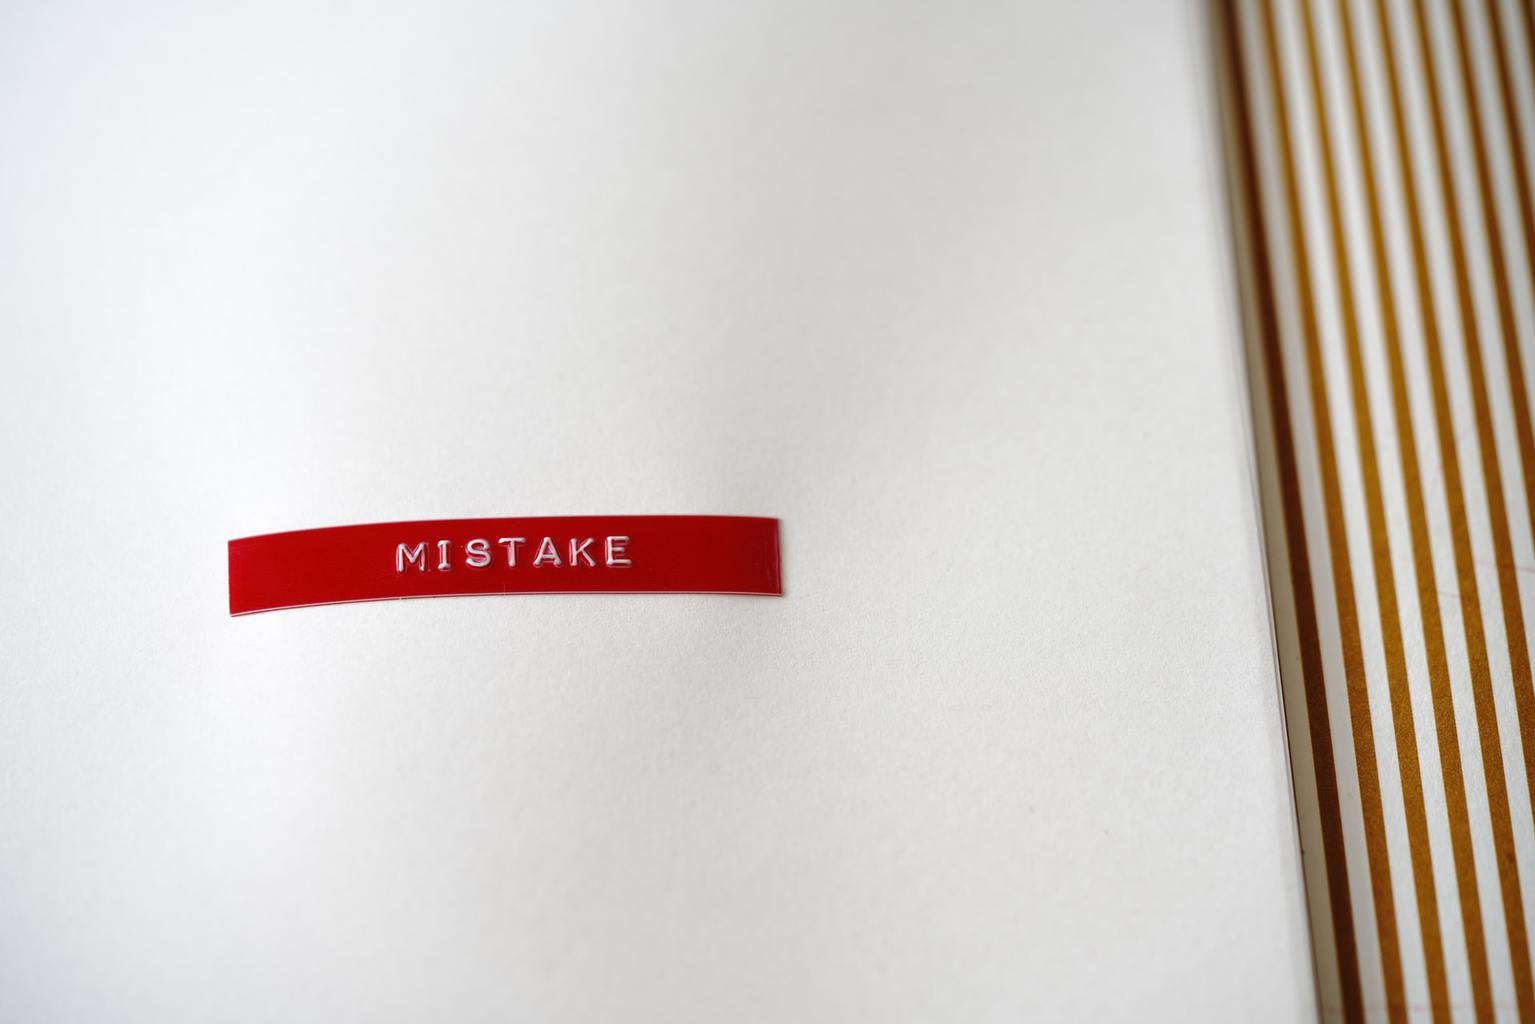 Five Rookie Mistakes Nearly Every Blogger Makes and How to Avoid Them